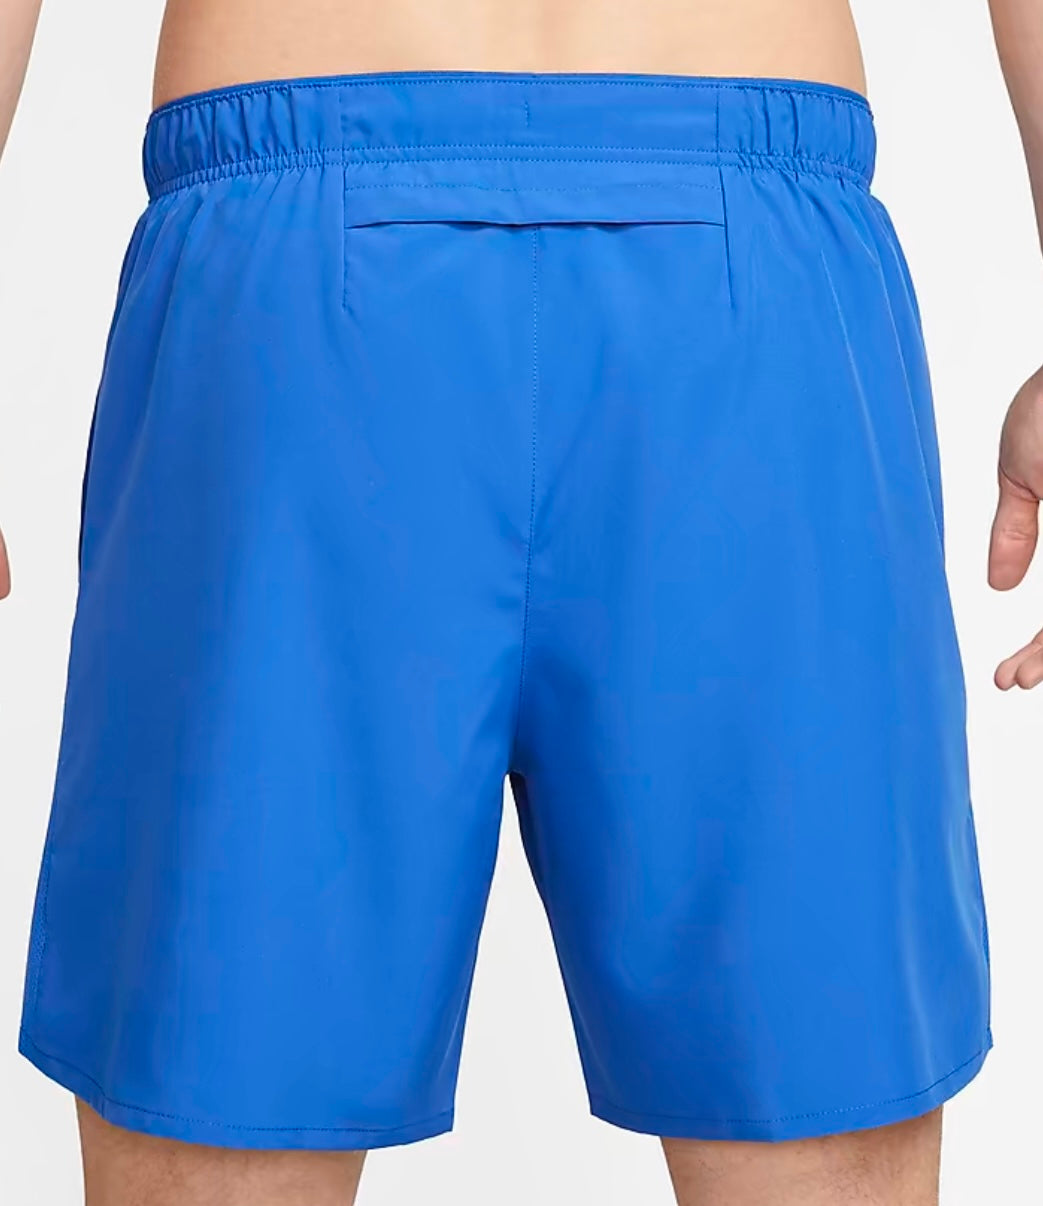 NIKE CHALLENGER SHORTS (7 INCH) - BLUE